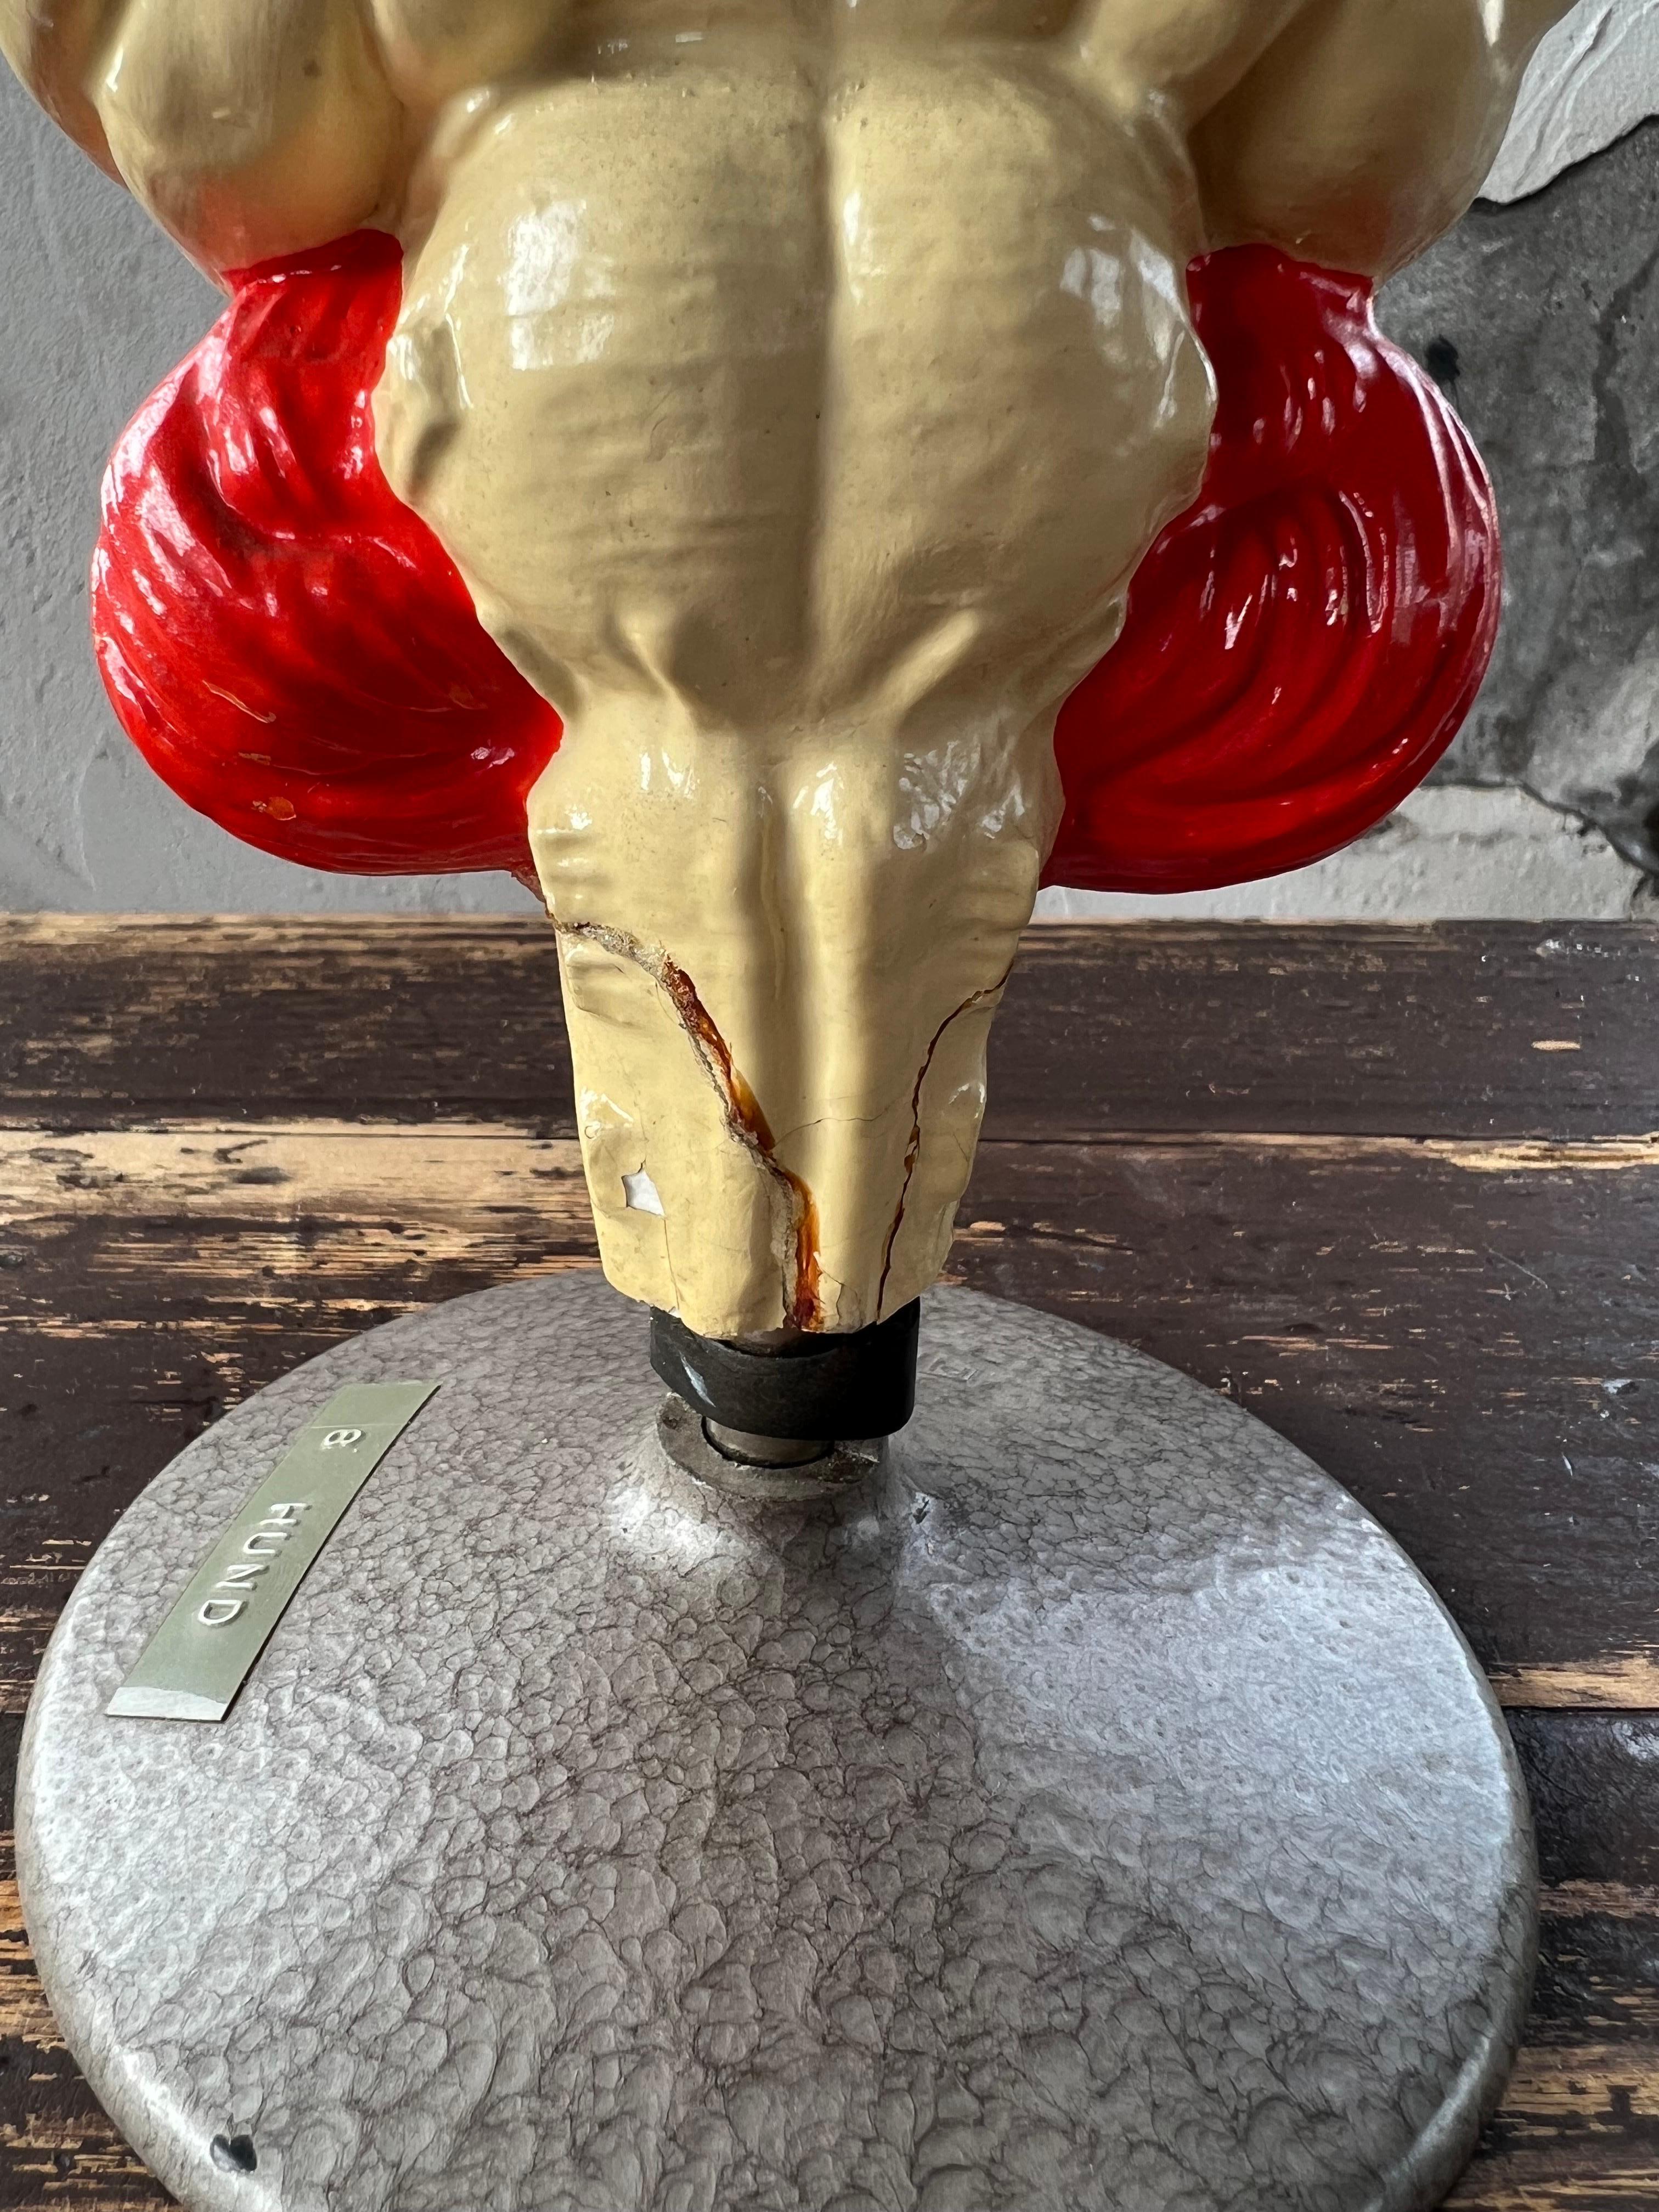 Rare old anatomical plaster model of the dog's brain. Beautiful details on a plastic/bakelite base. Worn (small cracks, base repare) but still in good condition as shown in the images. Numbered with German name indication. Probably 1960's

The model